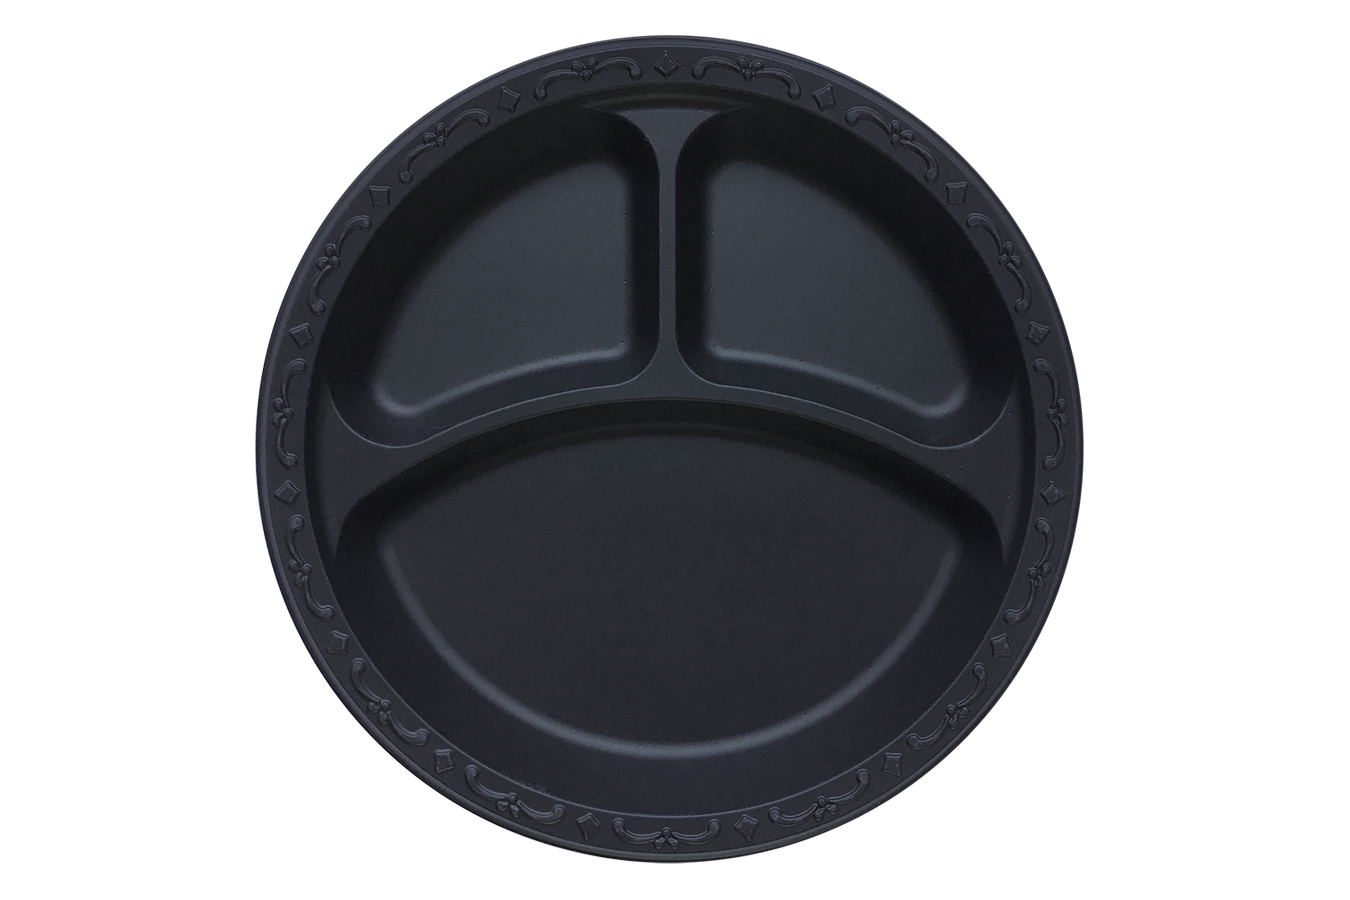 Black Polypropylene PP Plastic round 10 inches pebble box plate with 3 compartments